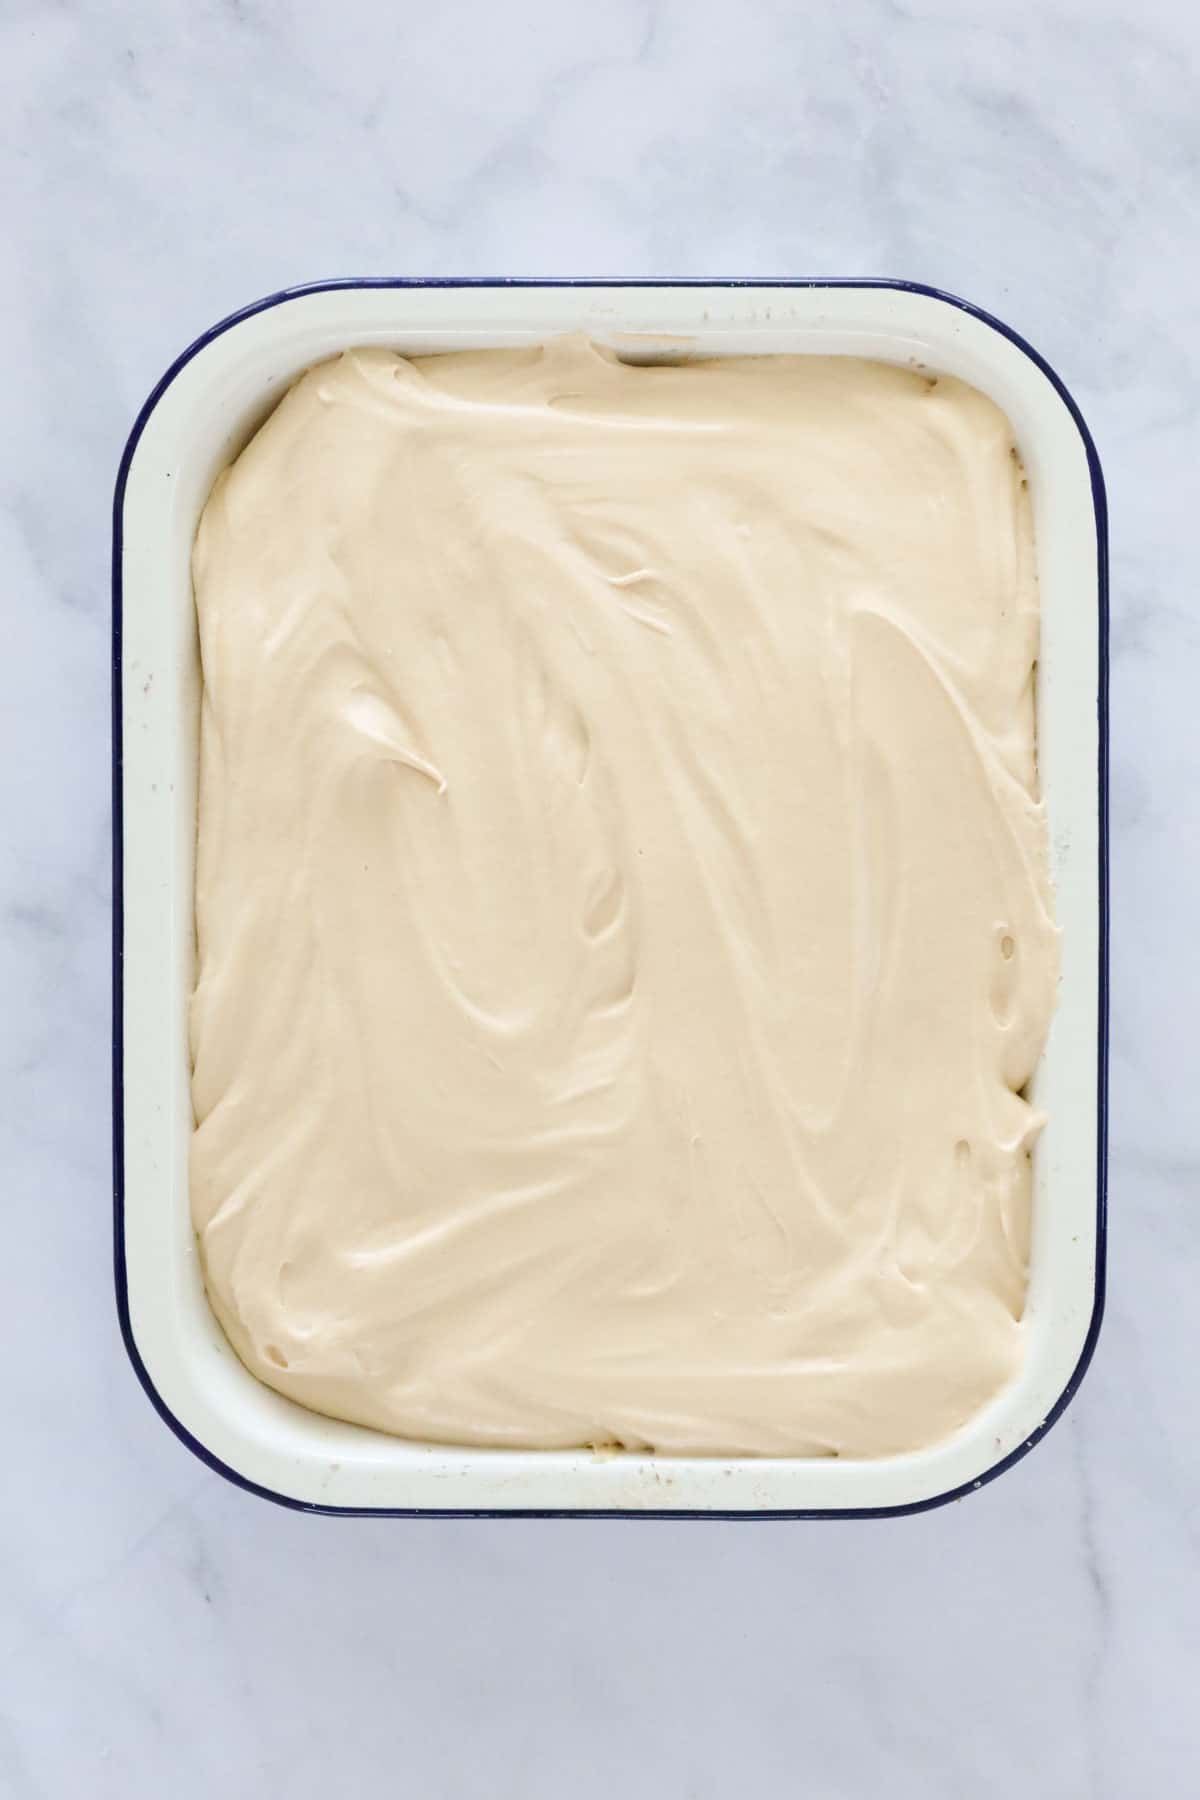 Caramel cream spread over biscuits in a baking tin.